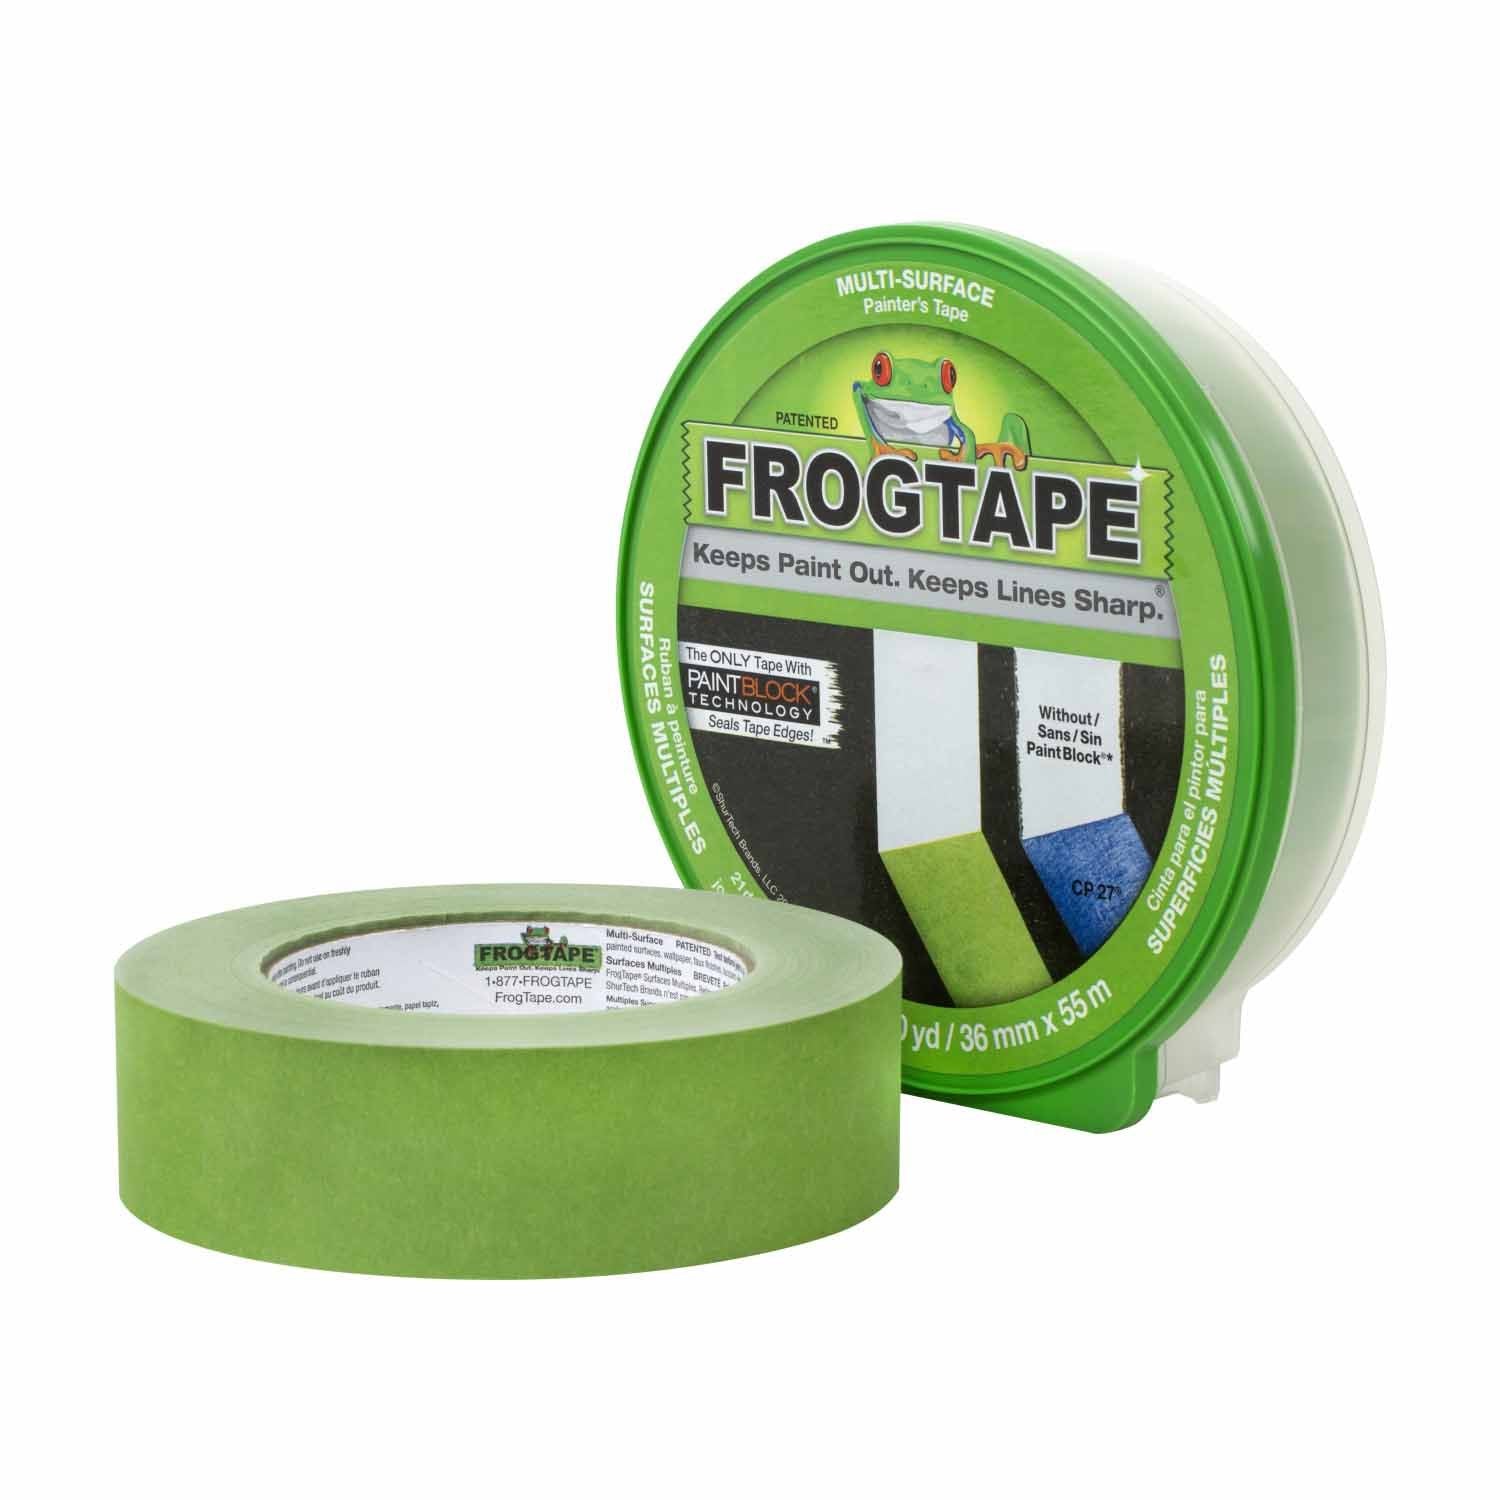 FrogTape multi surface tape, available at Regal Paint Centers in MD. 